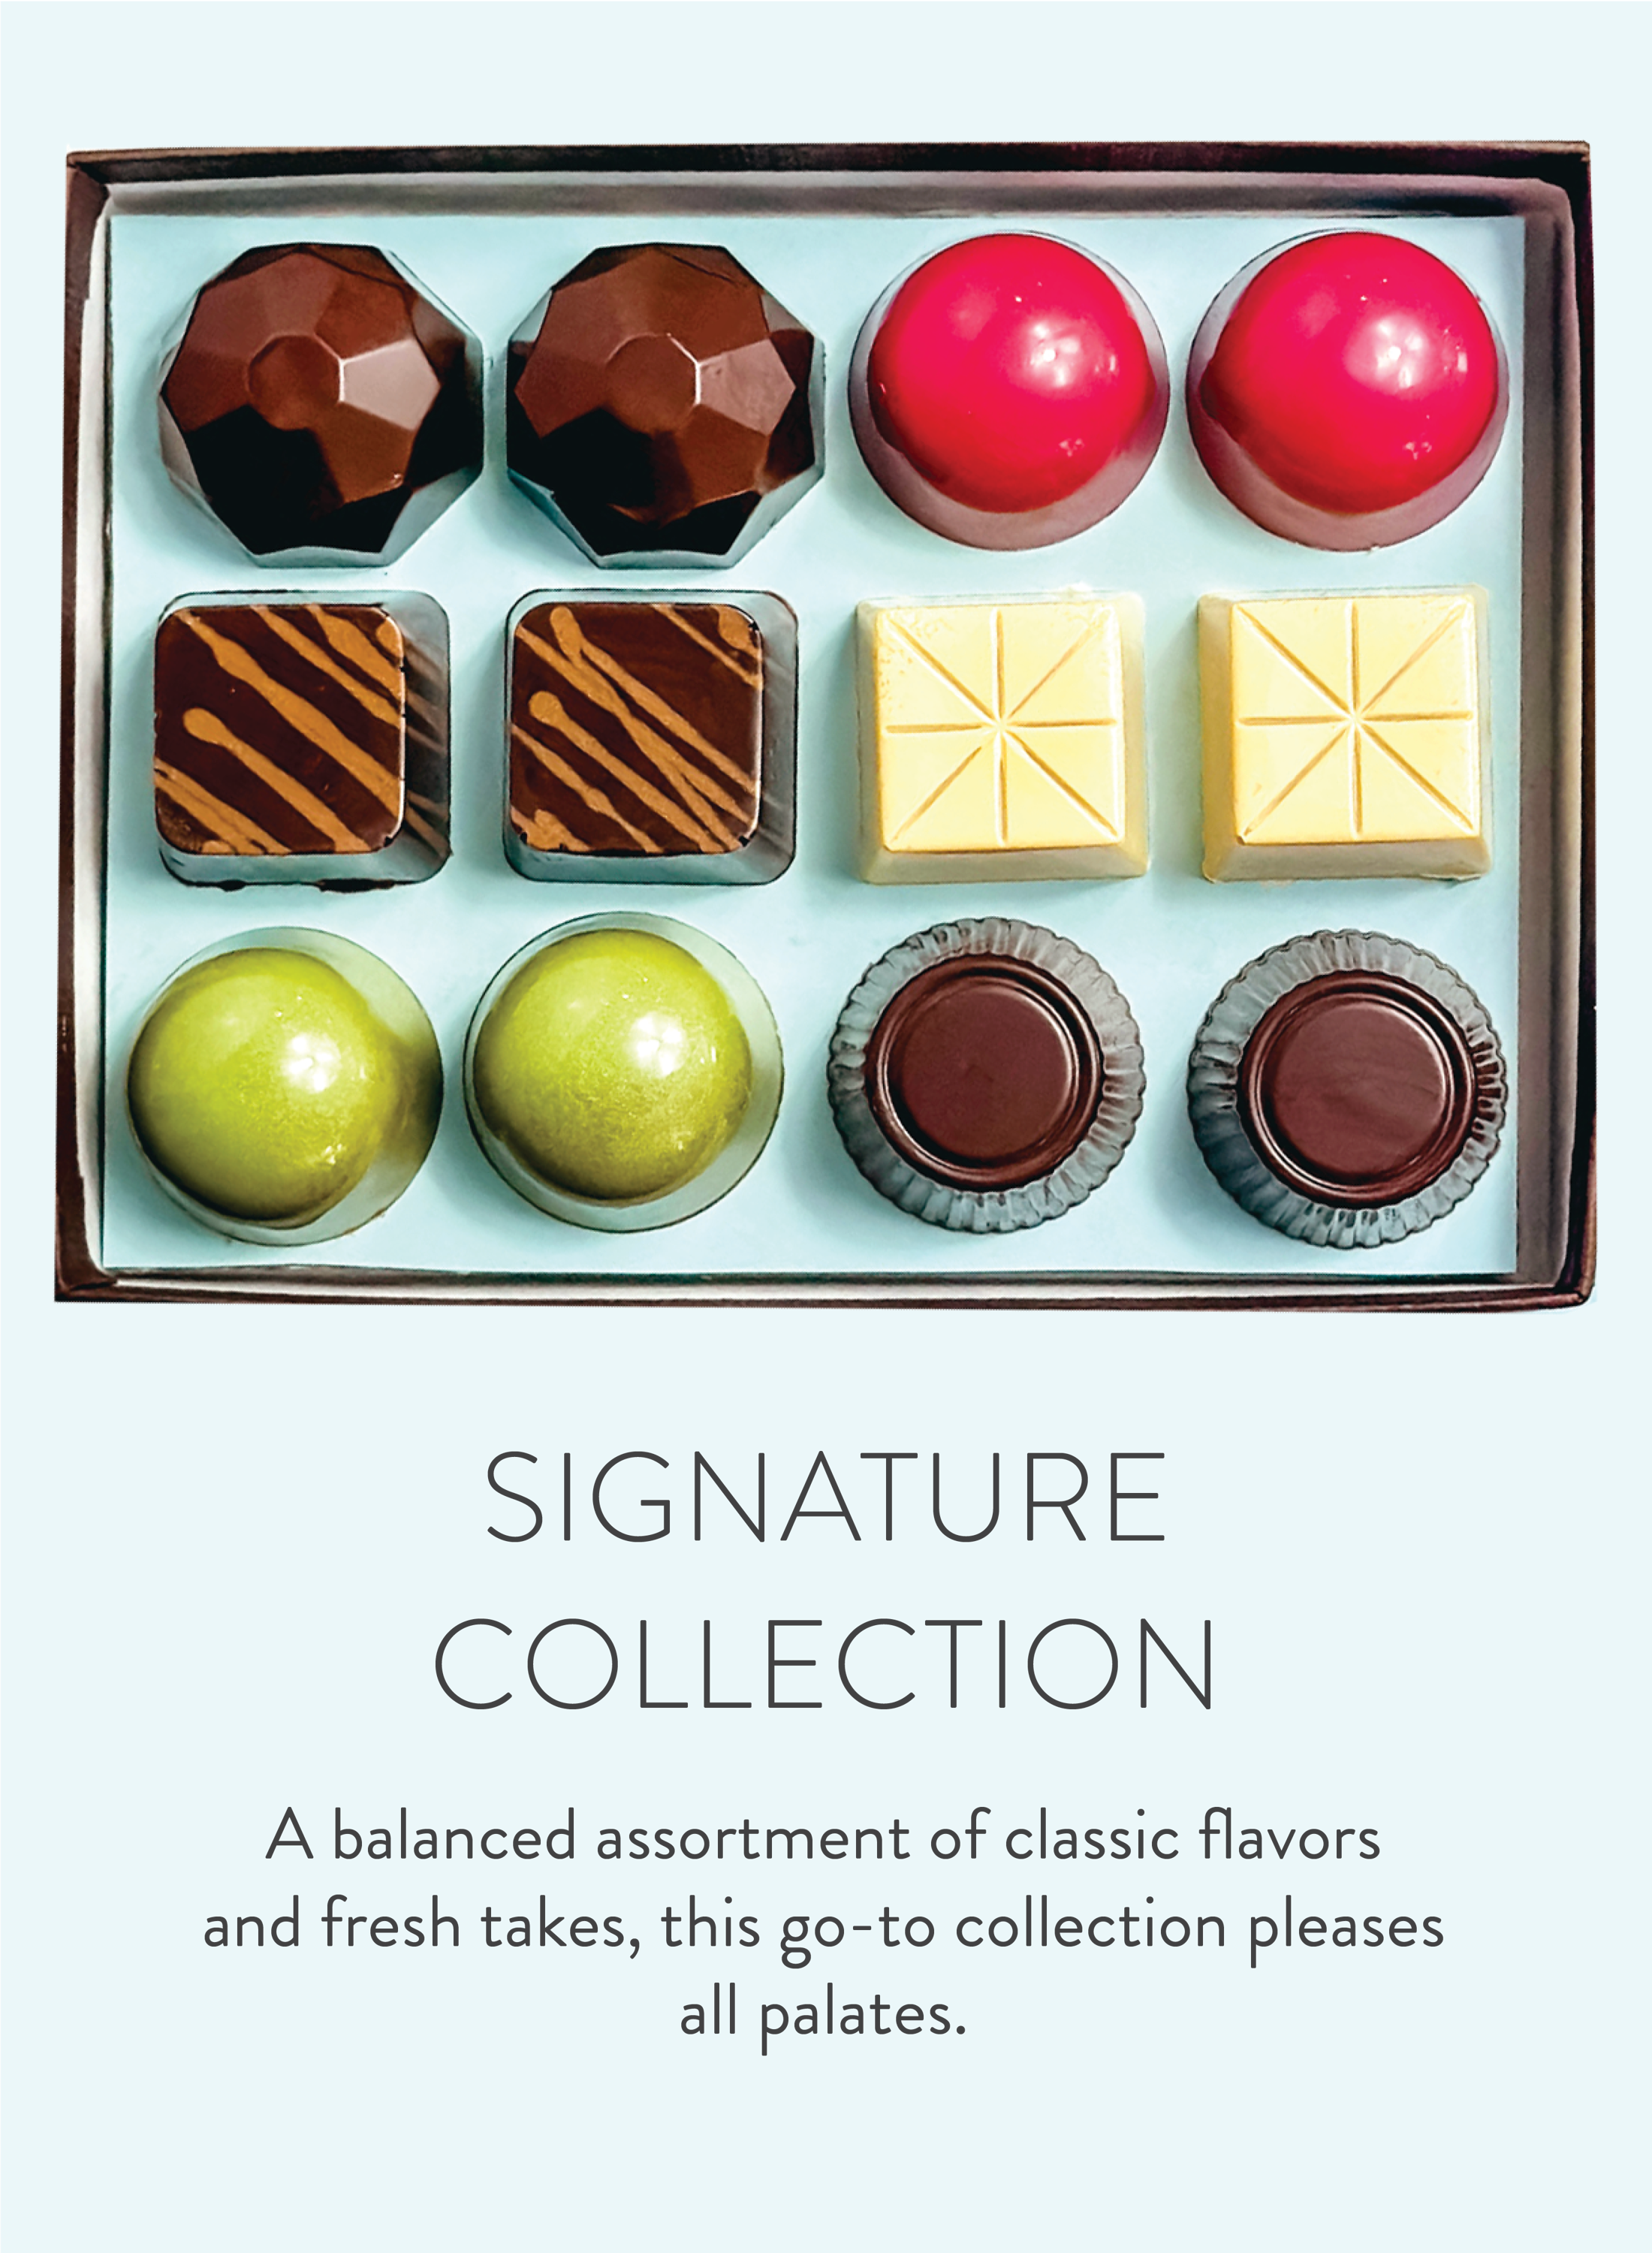 Signature Collection product page